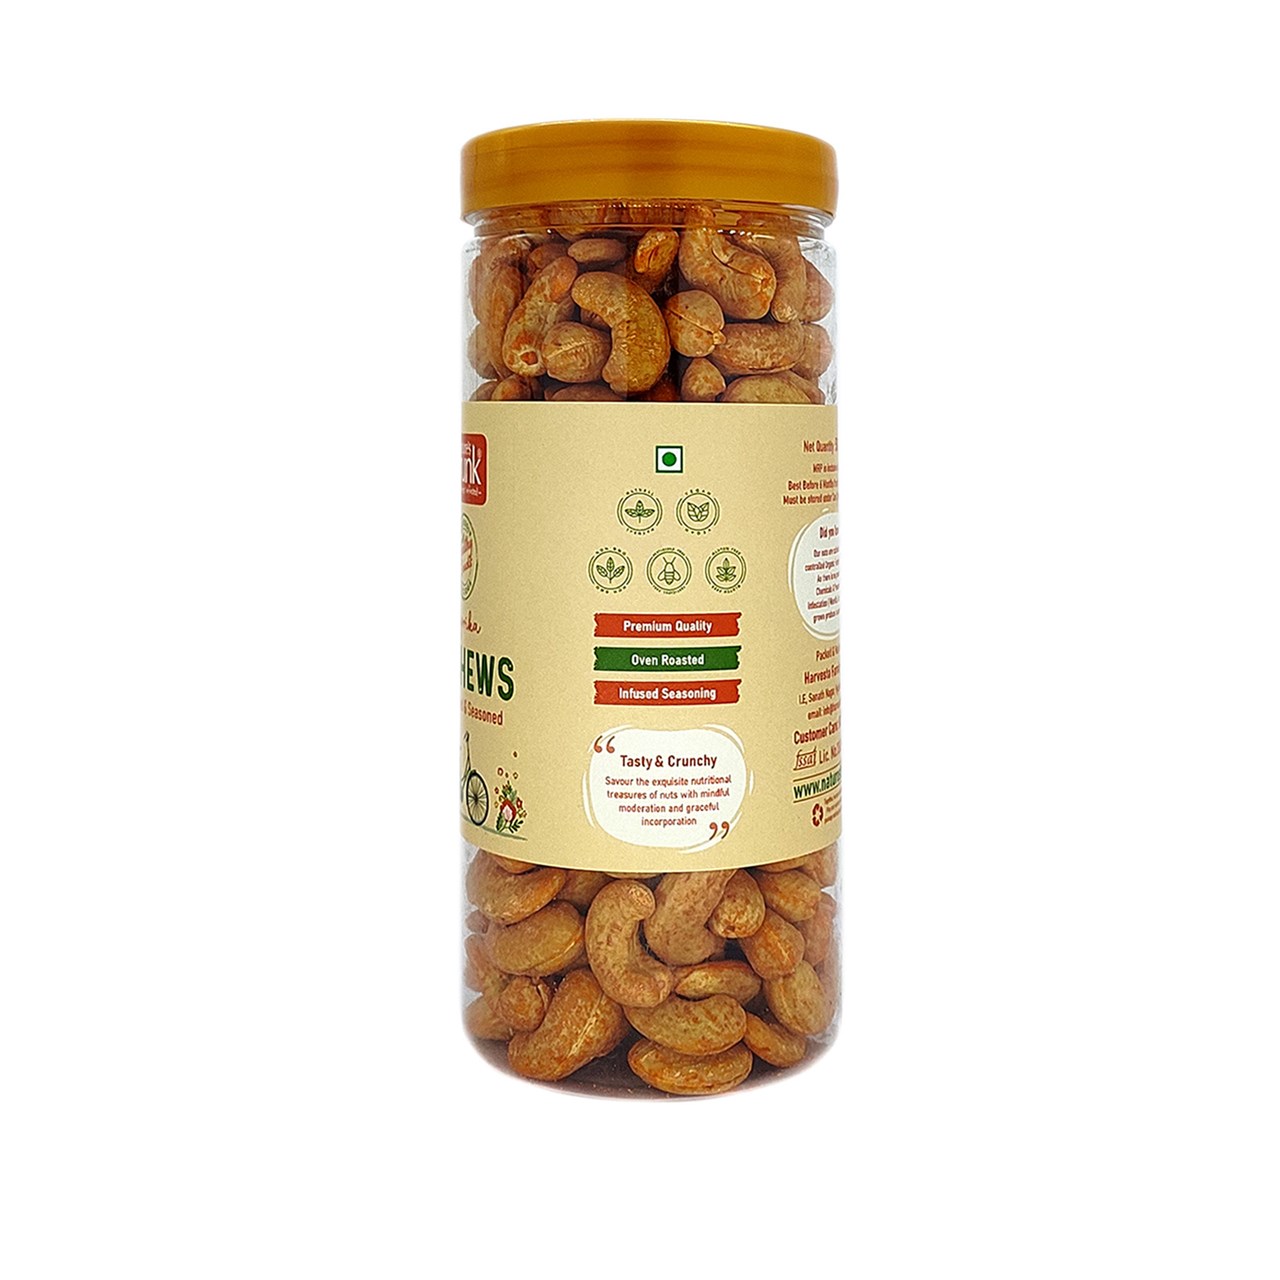 Picture of Nature's Trunk Premium Nutty Delight Paprika Cashew Nuts 500g,Pet Bottle | Nutritious & Delicious Paprika Flavour Jumbo Kaju(Jeedipappu) | Gluten & Fat Free | Heart-Healthy Snack